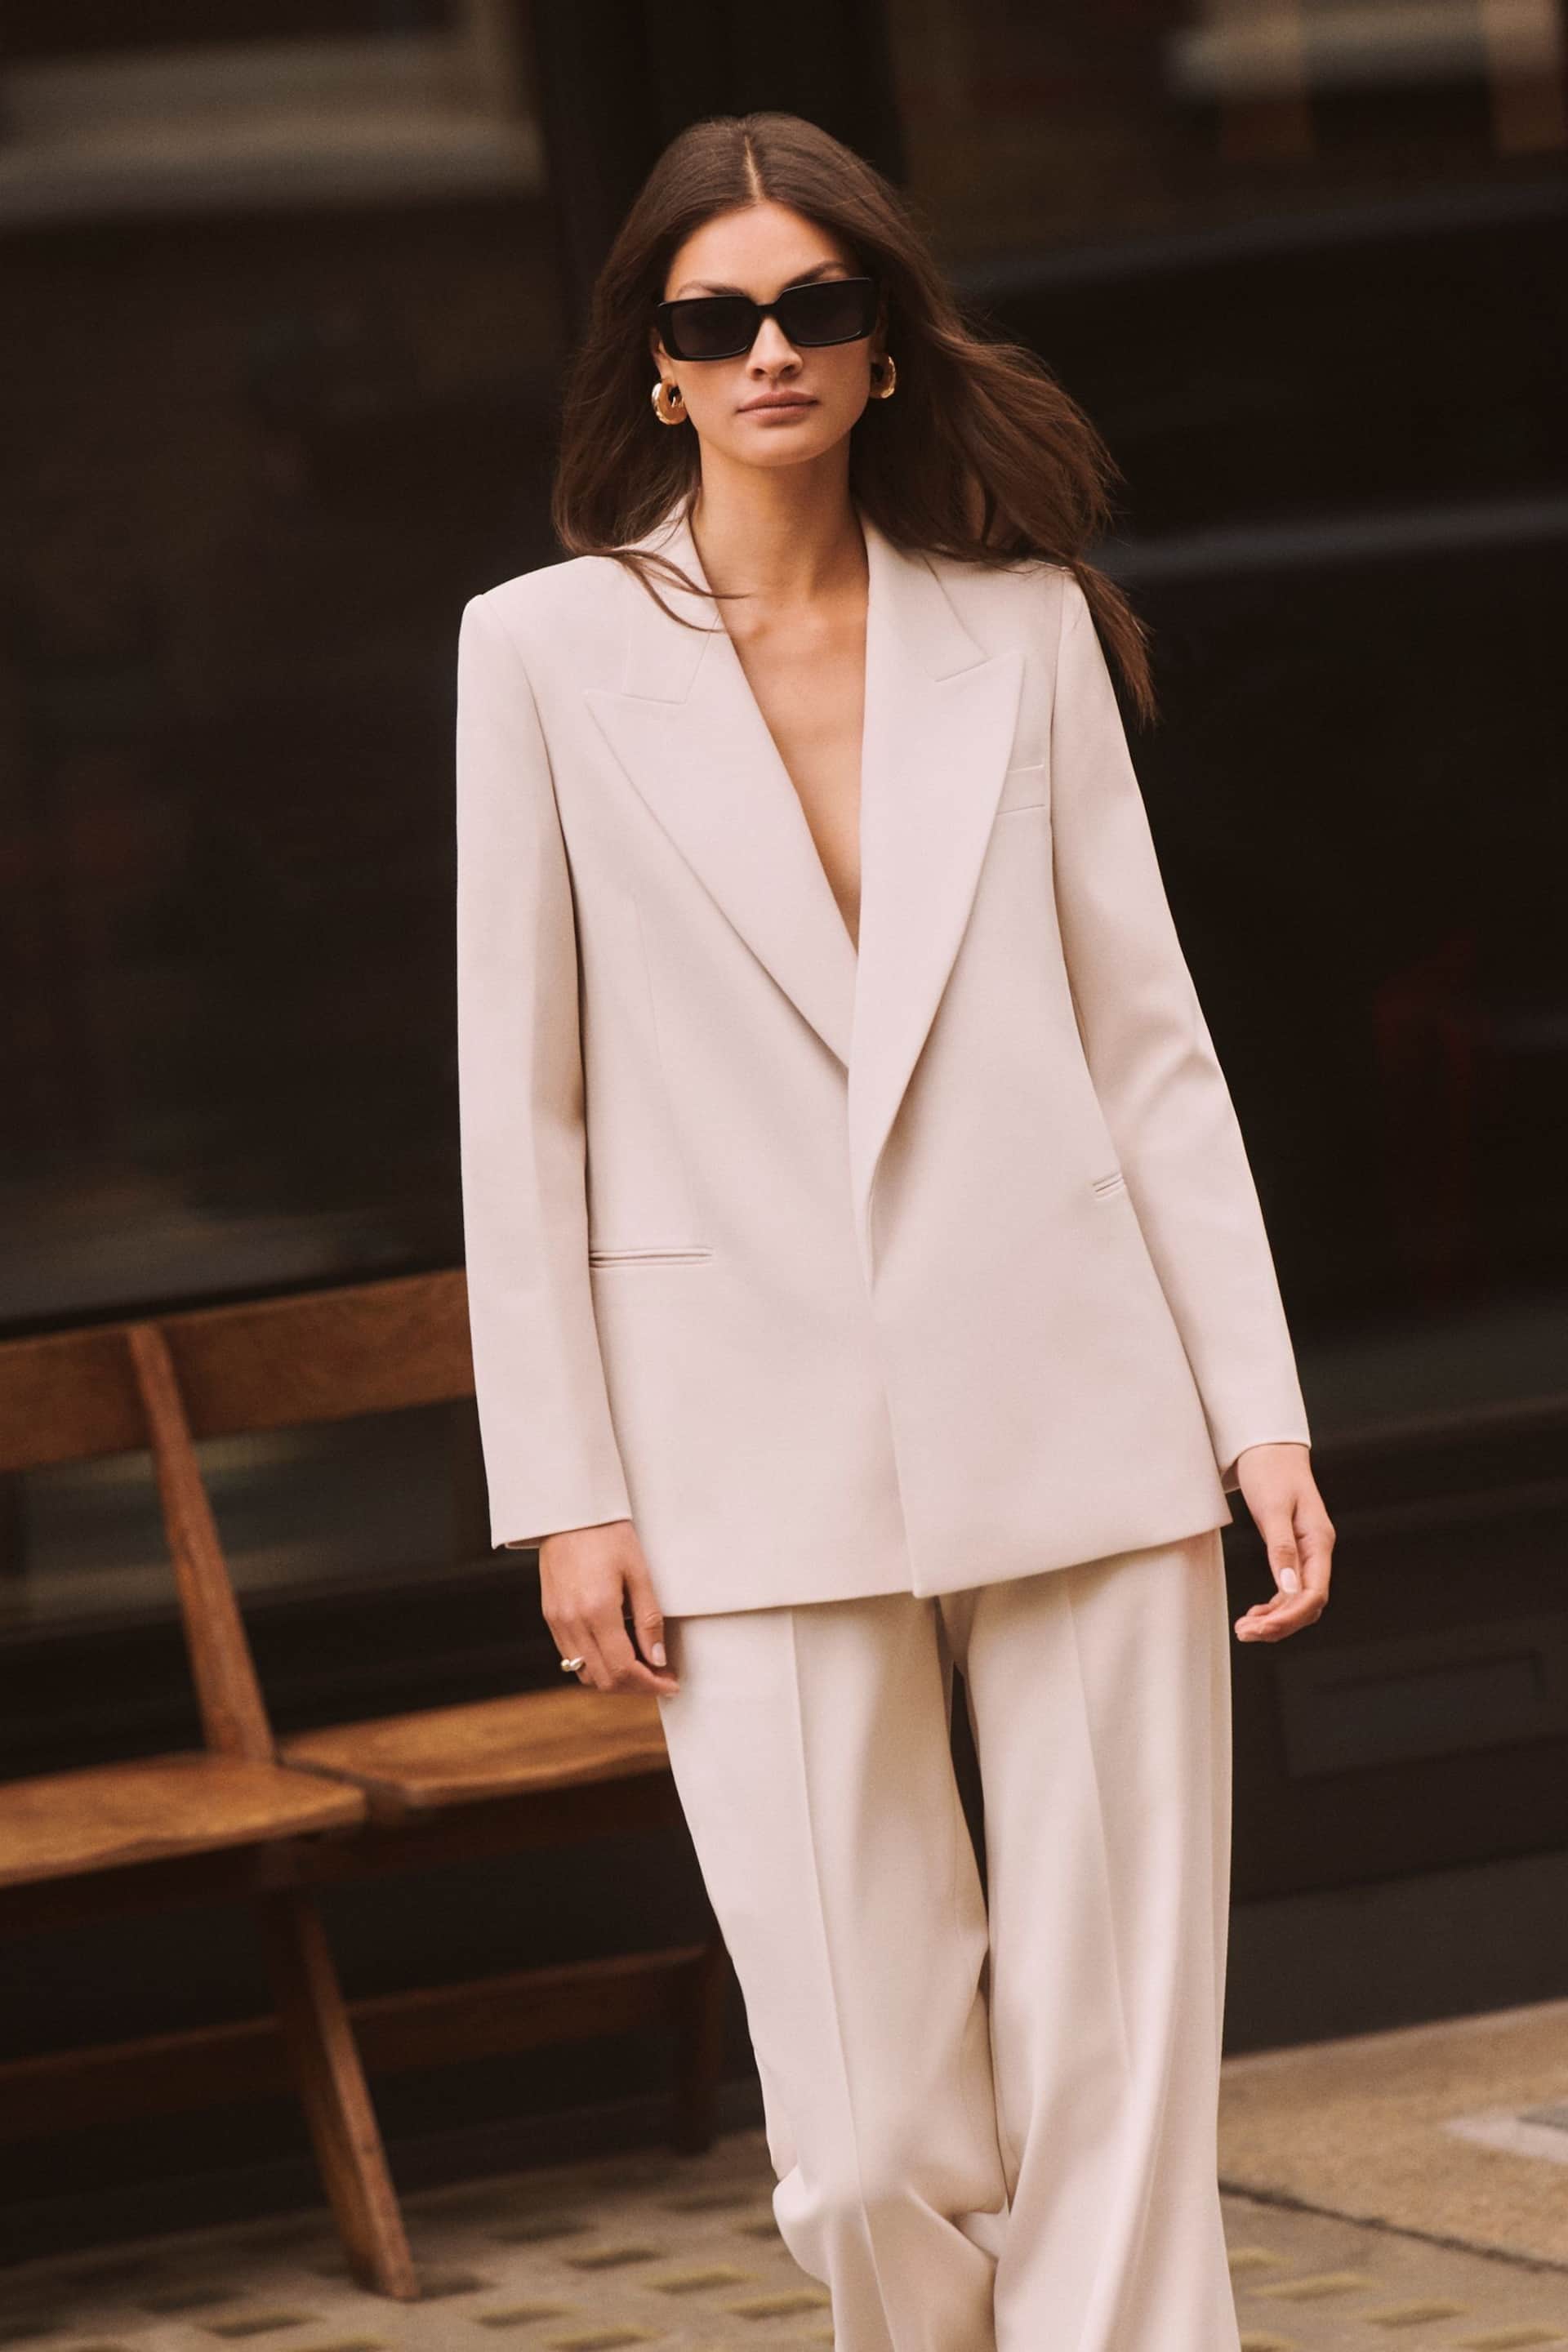 Reiss Neutral Maya Petite Tailored Fit Single Breasted Suit Blazer - Image 3 of 6